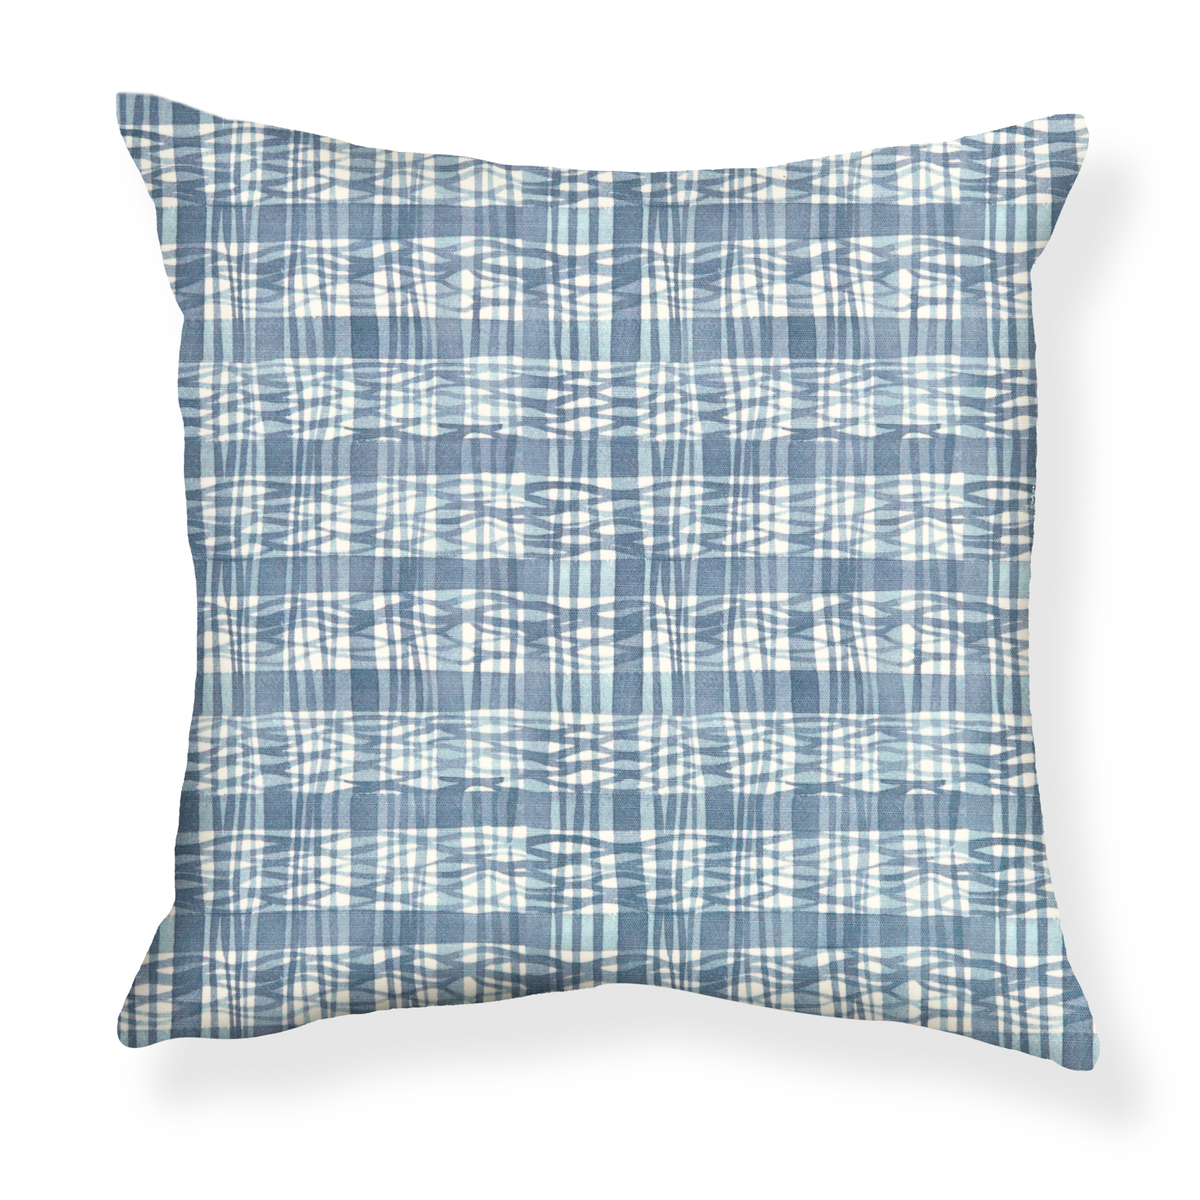 Thatched Pillow in Lake Blue